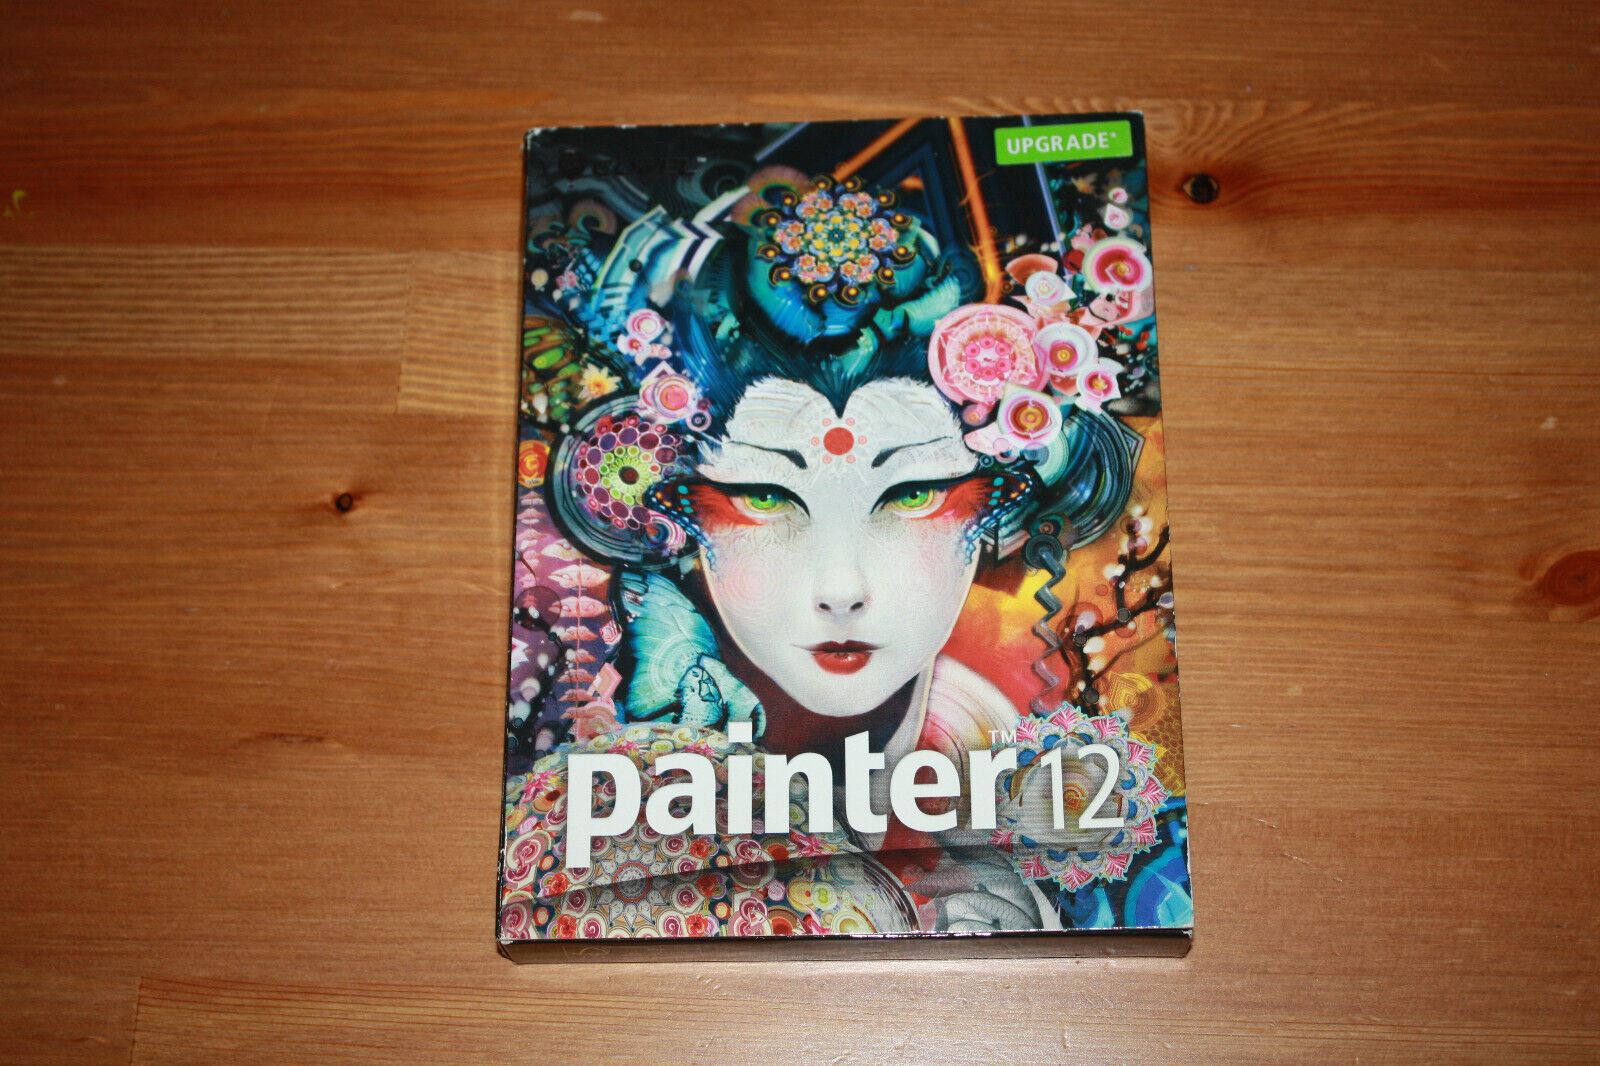 Corel Painter 12 by Corel *UPGRADE* Software W/Getting Started Guide Windows/Mac